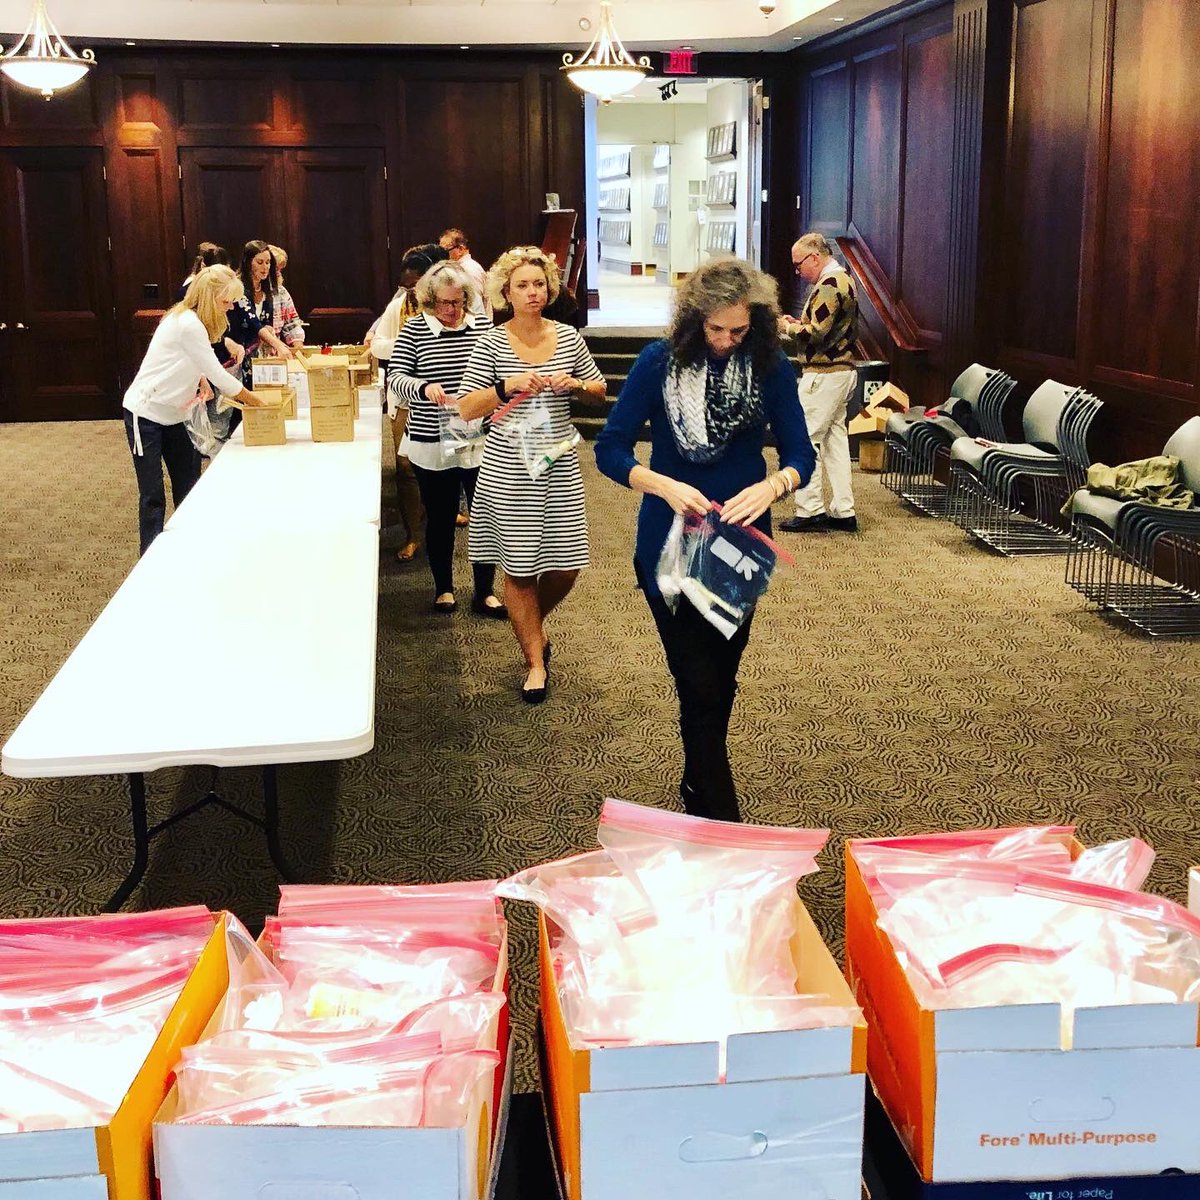 23 minutes & 24 MBers later... we have 900 hygiene packs for the @DaytonUnitedWay! We are so excited to see how these necessities help people in the area! A huge thanks to @SDCsmiles for donating 200 toothbrushes & 200 tubes of toothpaste for our drive! ❤️🦷🧼🧴 #MuchBetterAtMB